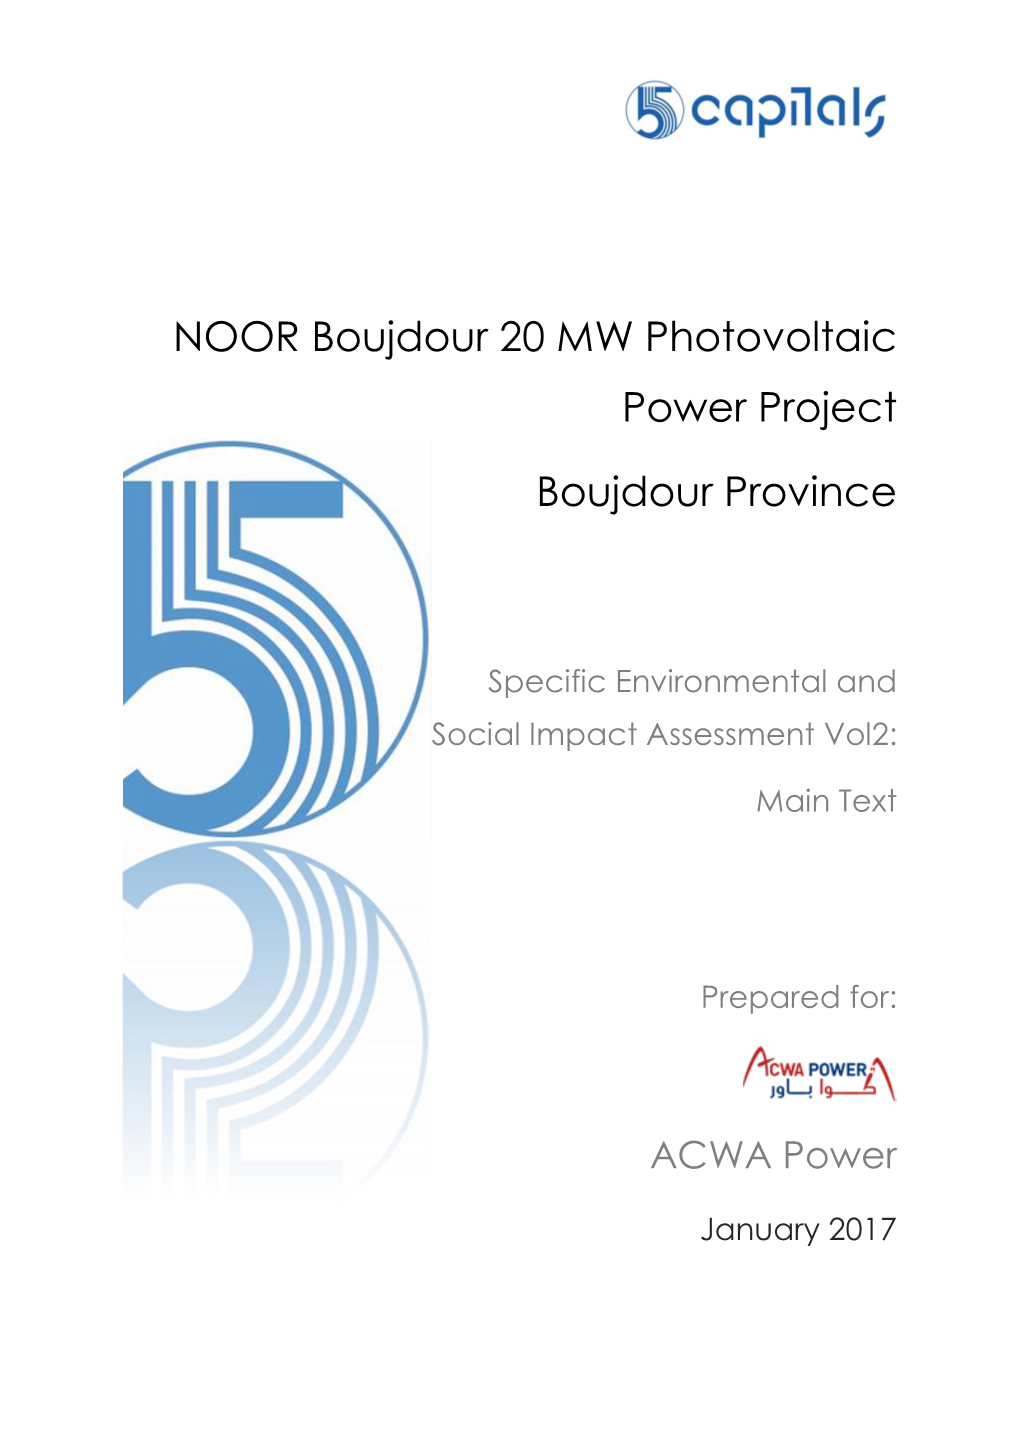 NOOR Boujdour 20 MW Photovoltaic Power Project Boujdour Province